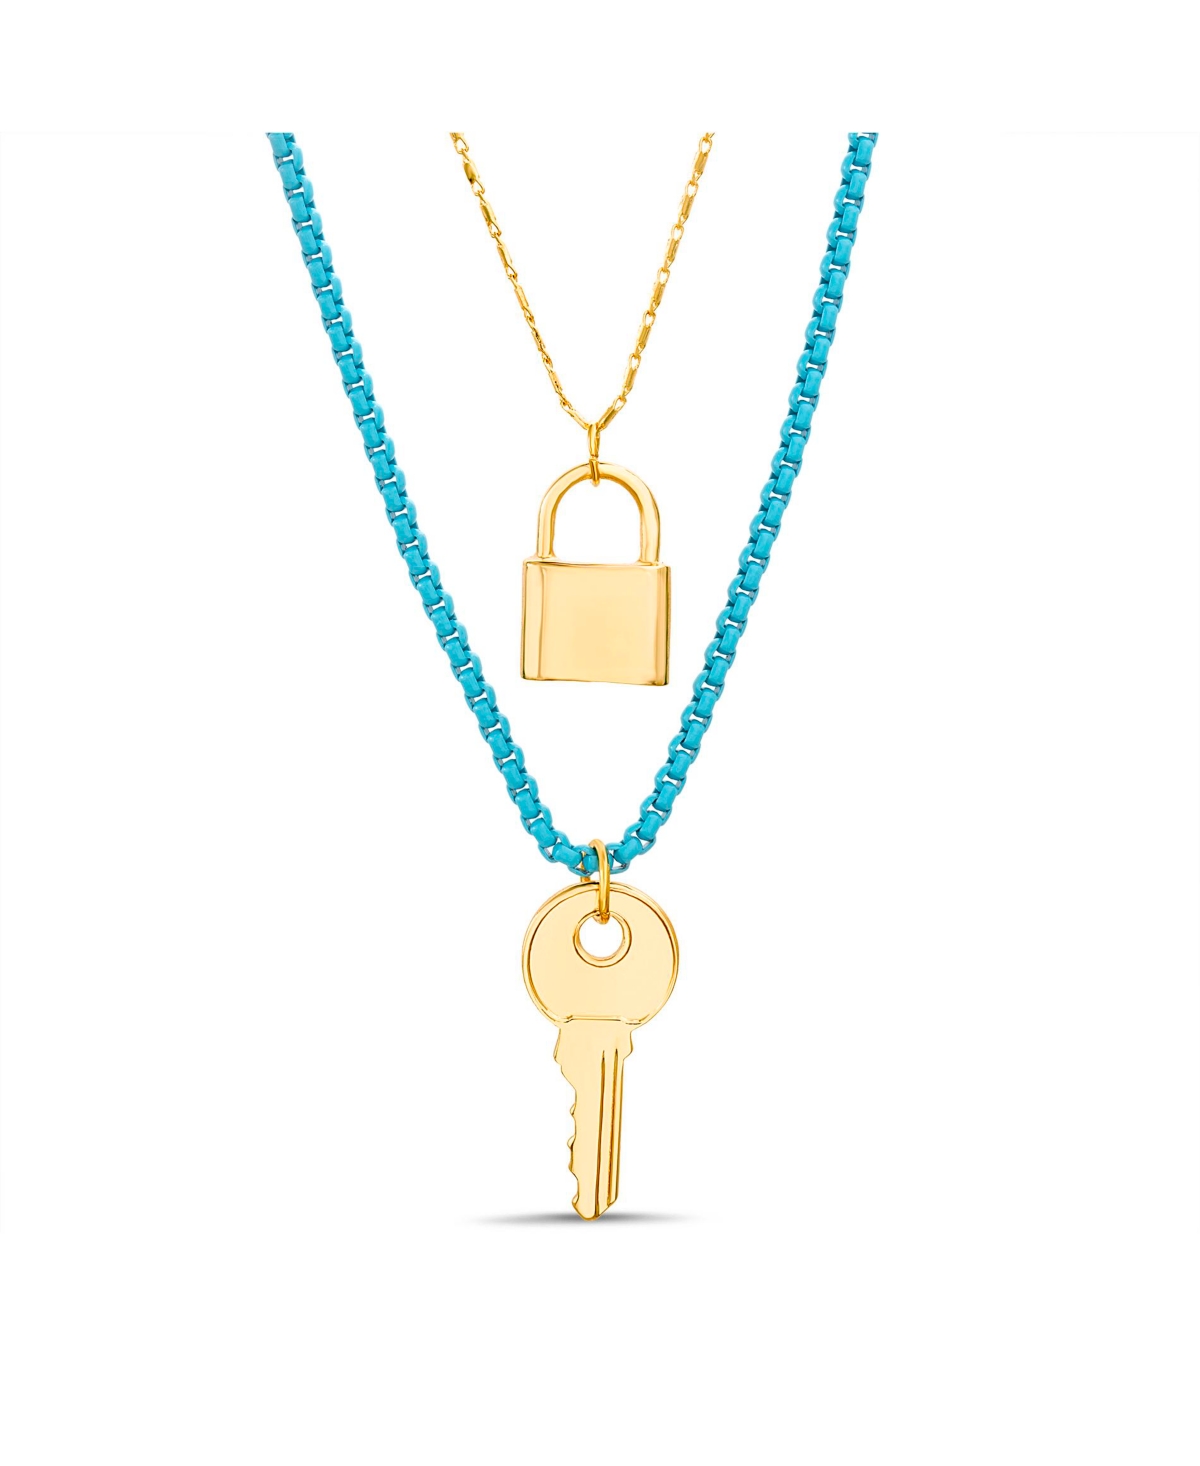 Yellow Gold-Tone Key and Lock Necklace Set - Multi